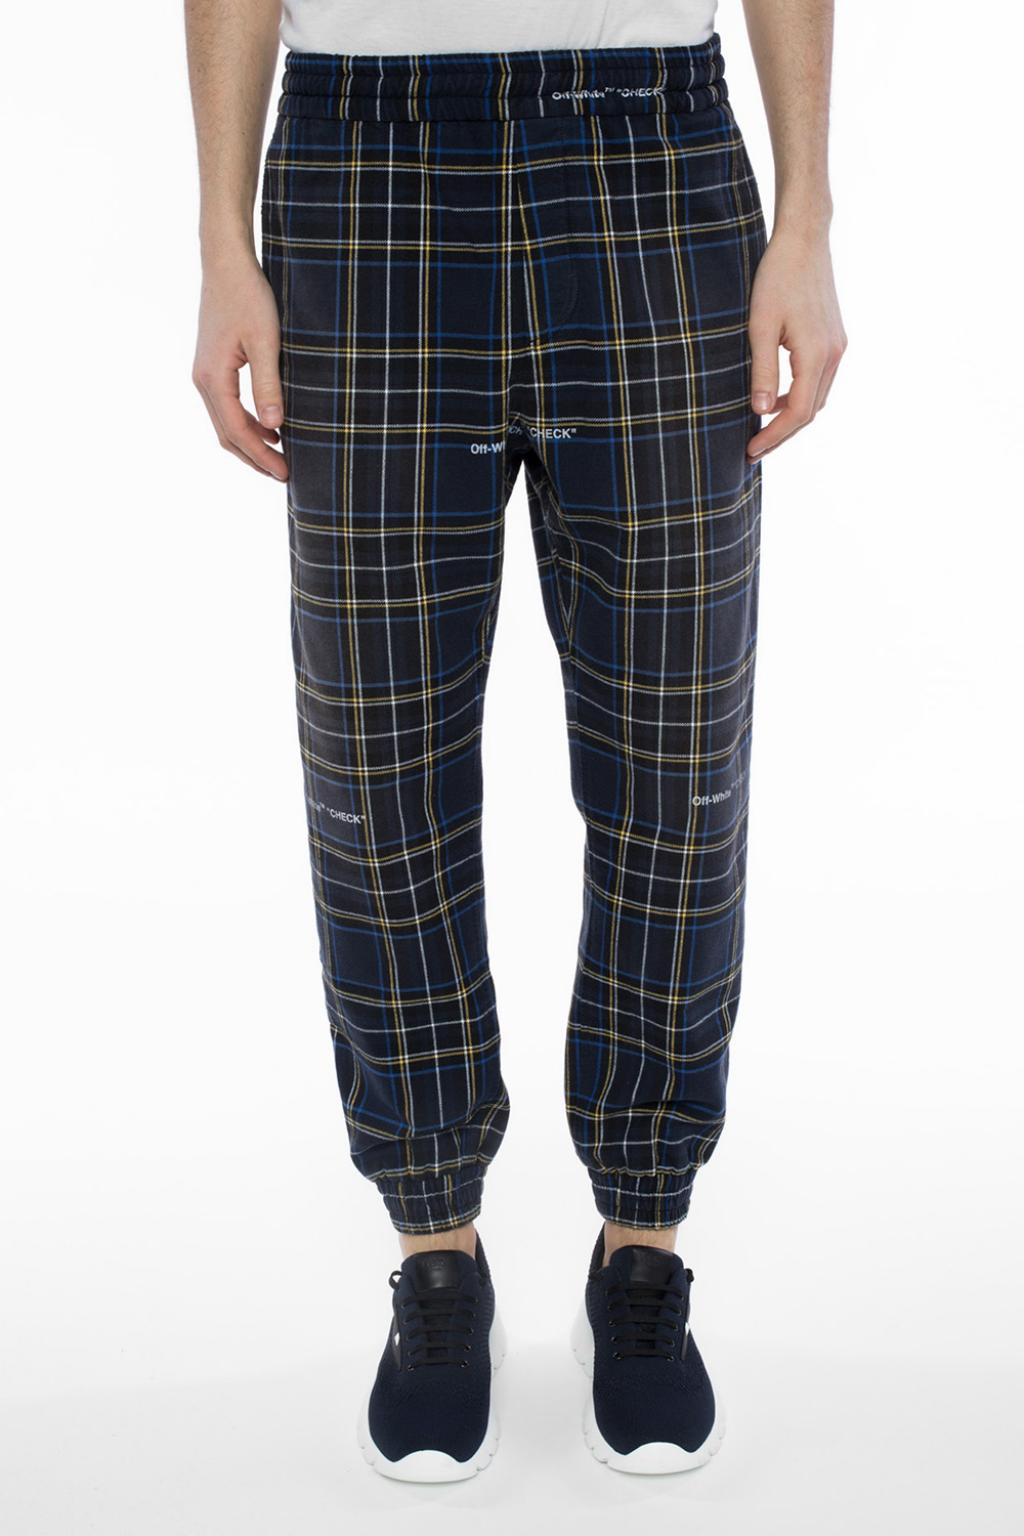 o Virgil Abloh Cotton Checked Trousers 